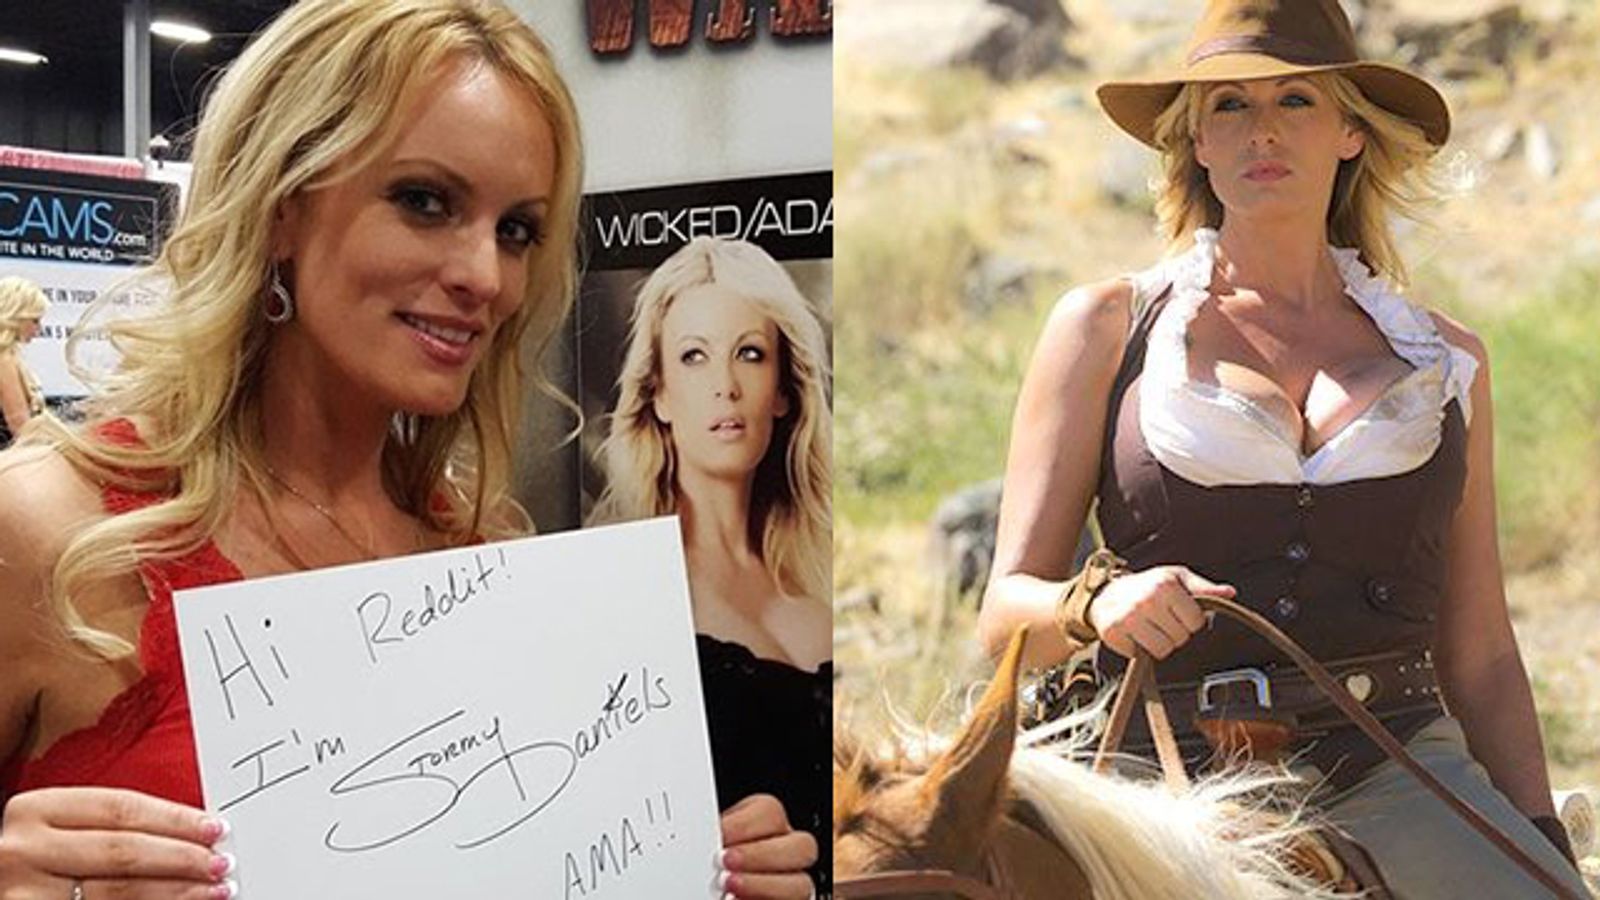 Wicked's Star/Director Stormy Daniels Bares All on Reddit-UPDATED